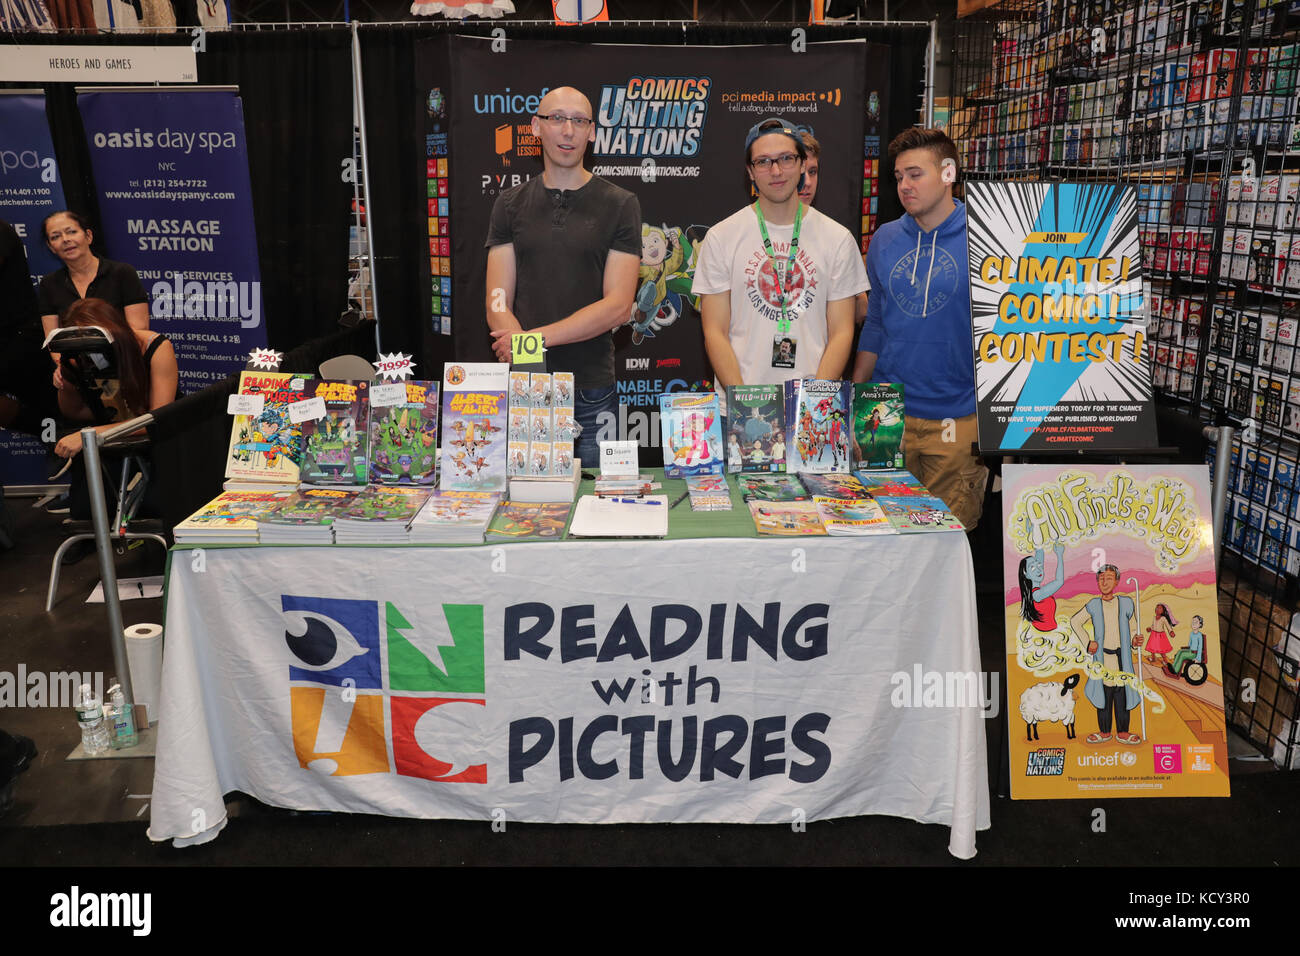 New York, NY, USA. 7th Oct, 2017. Javits Convention Center, New York, USA, October 07 2017 - Comics Uniting Nations and Reading with Pictures During the 3rd Day of the 2017 New York Comic Con today in New York City.Photo: Luiz Rampelotto/EuropaNewswire Credit: Luiz Rampelotto/ZUMA Wire/Alamy Live News Stock Photo